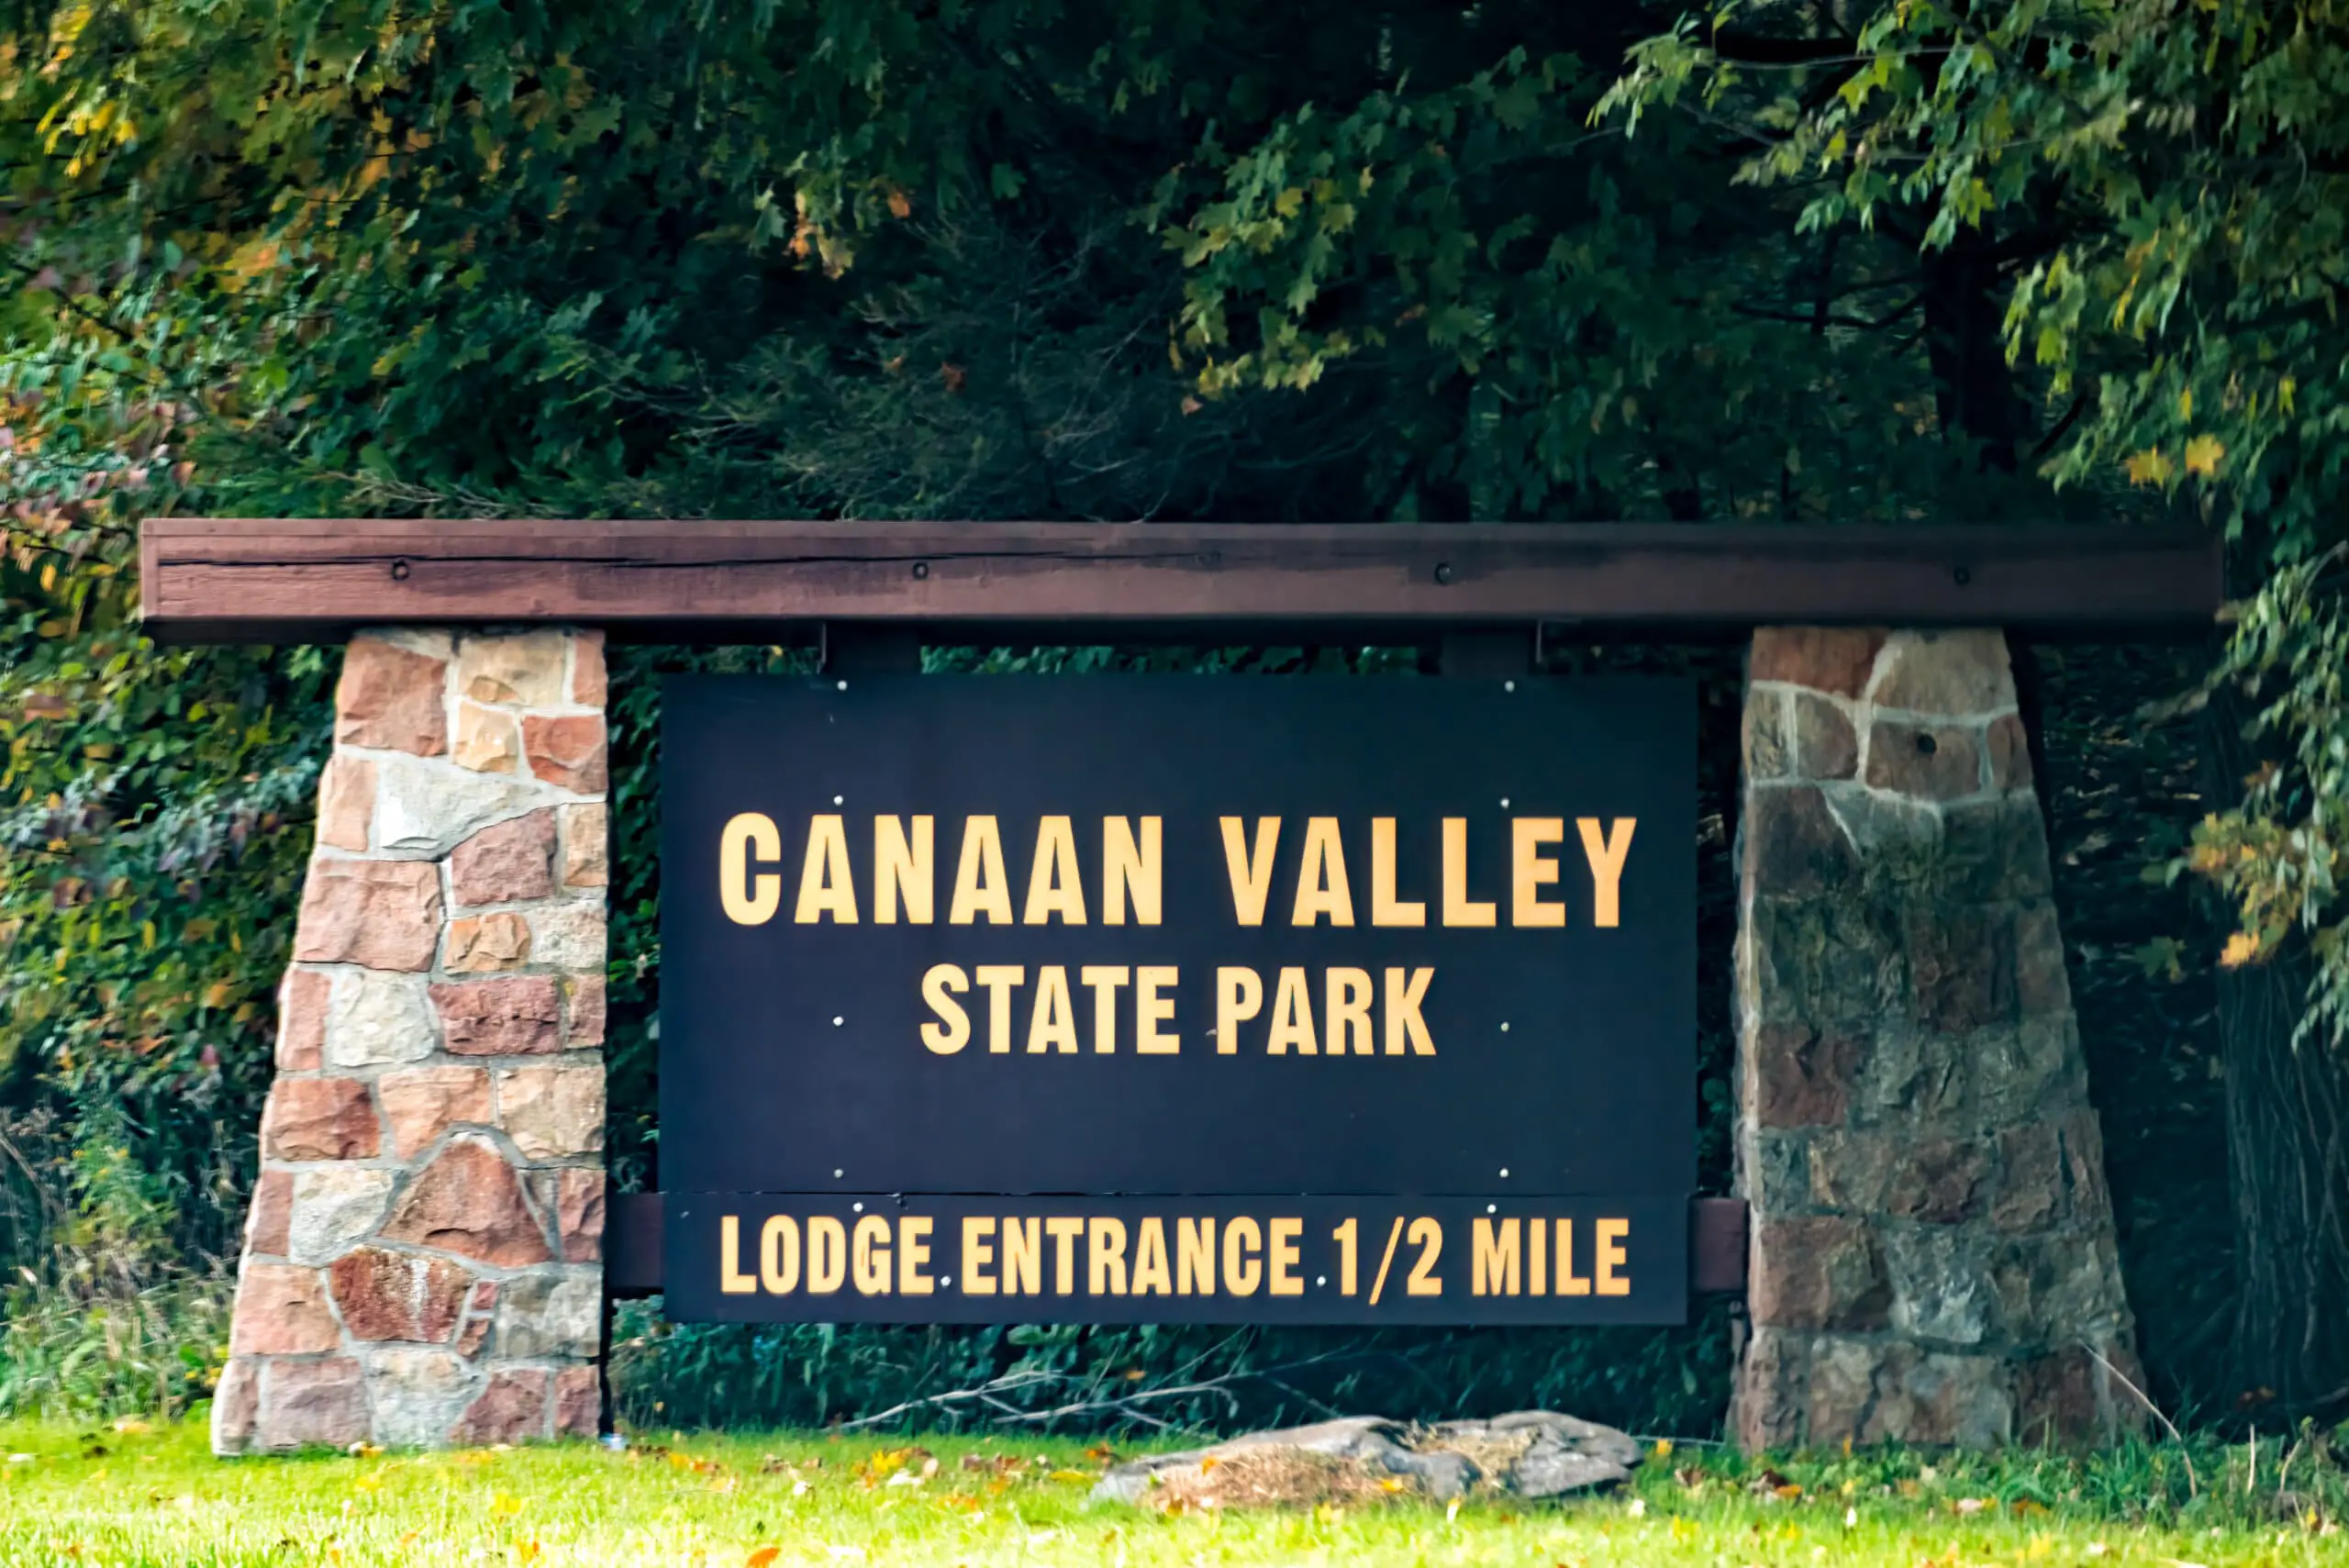 Sign on road for Canaan valley ski resort and conference center in state park in Davis, West Virginia at colorful autumn fall season